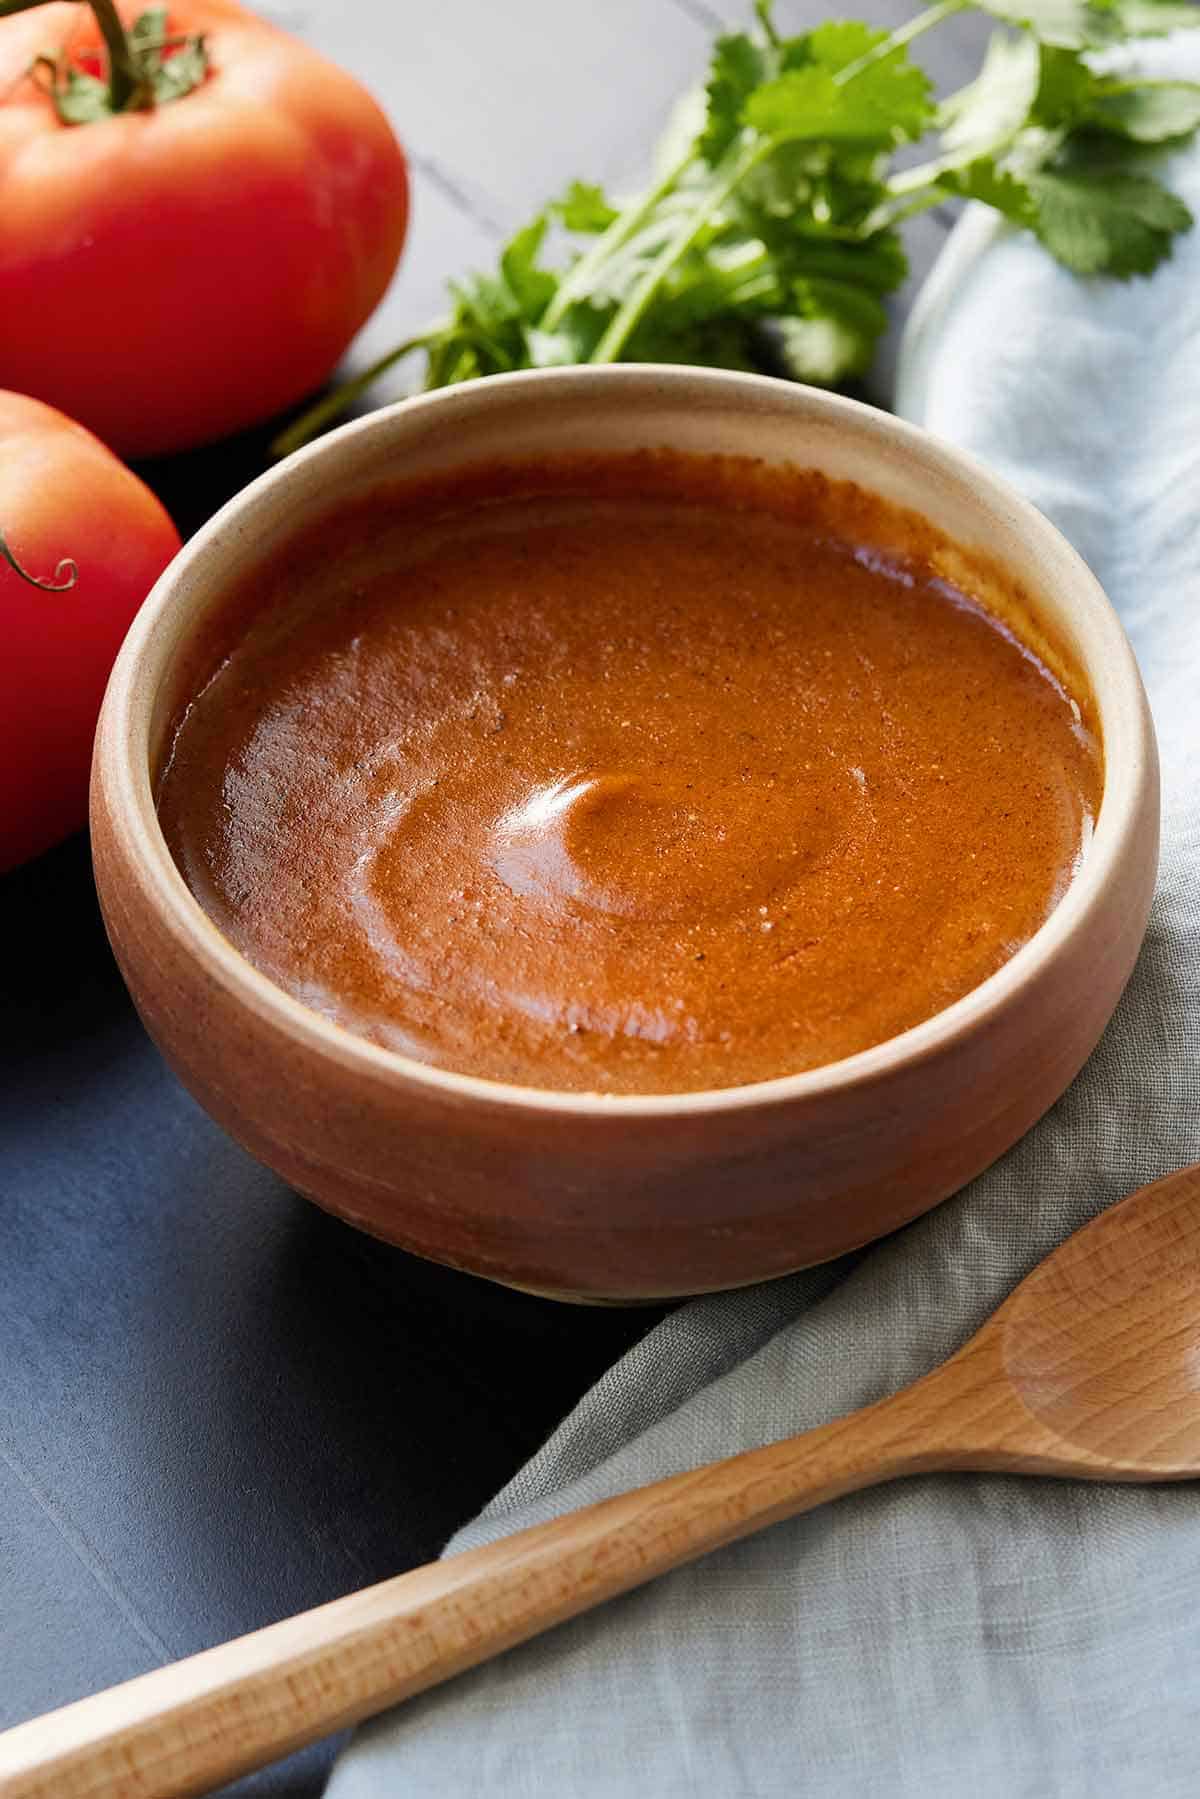 A bowl of homemade enchilada sauce beside linen and a wooden spoon.